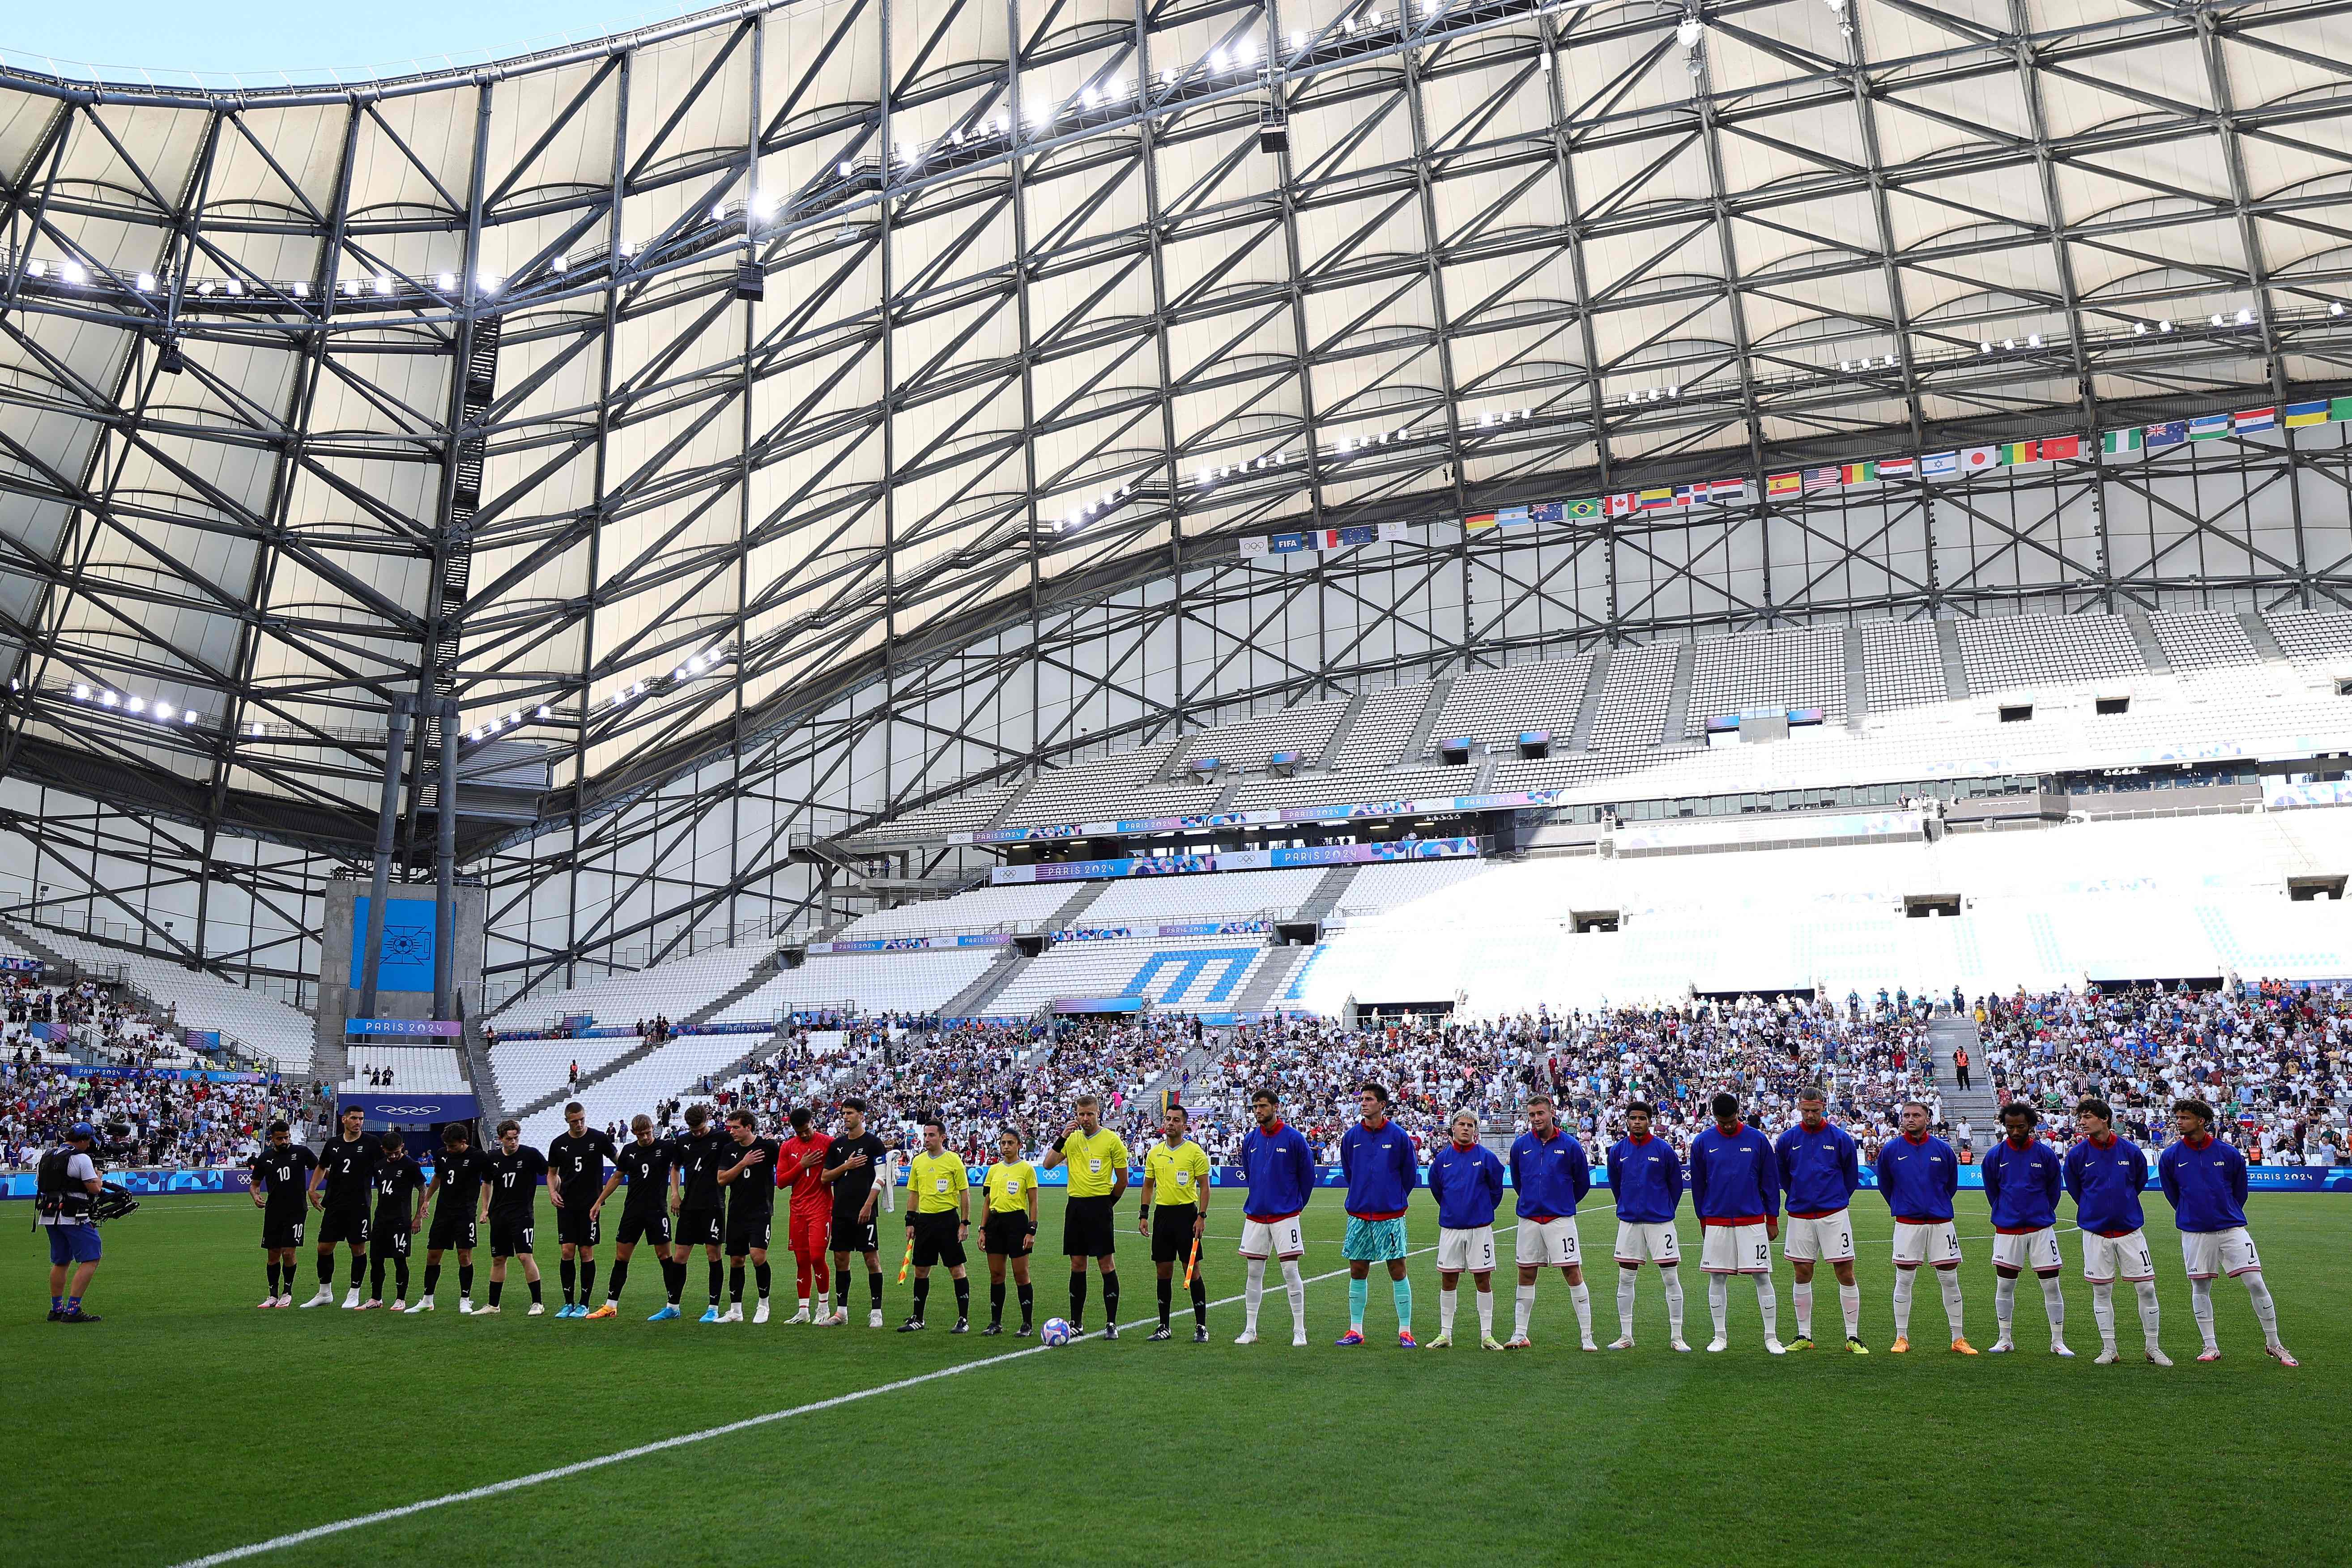 Players line up before the start of the men's group A football match between New Zealand and the USA during the Paris 2024 Olympic Games at the Marseille Stadium in Marseille on July 27, 2024. (Photo by Clement MAHOUDEAU / AFP)